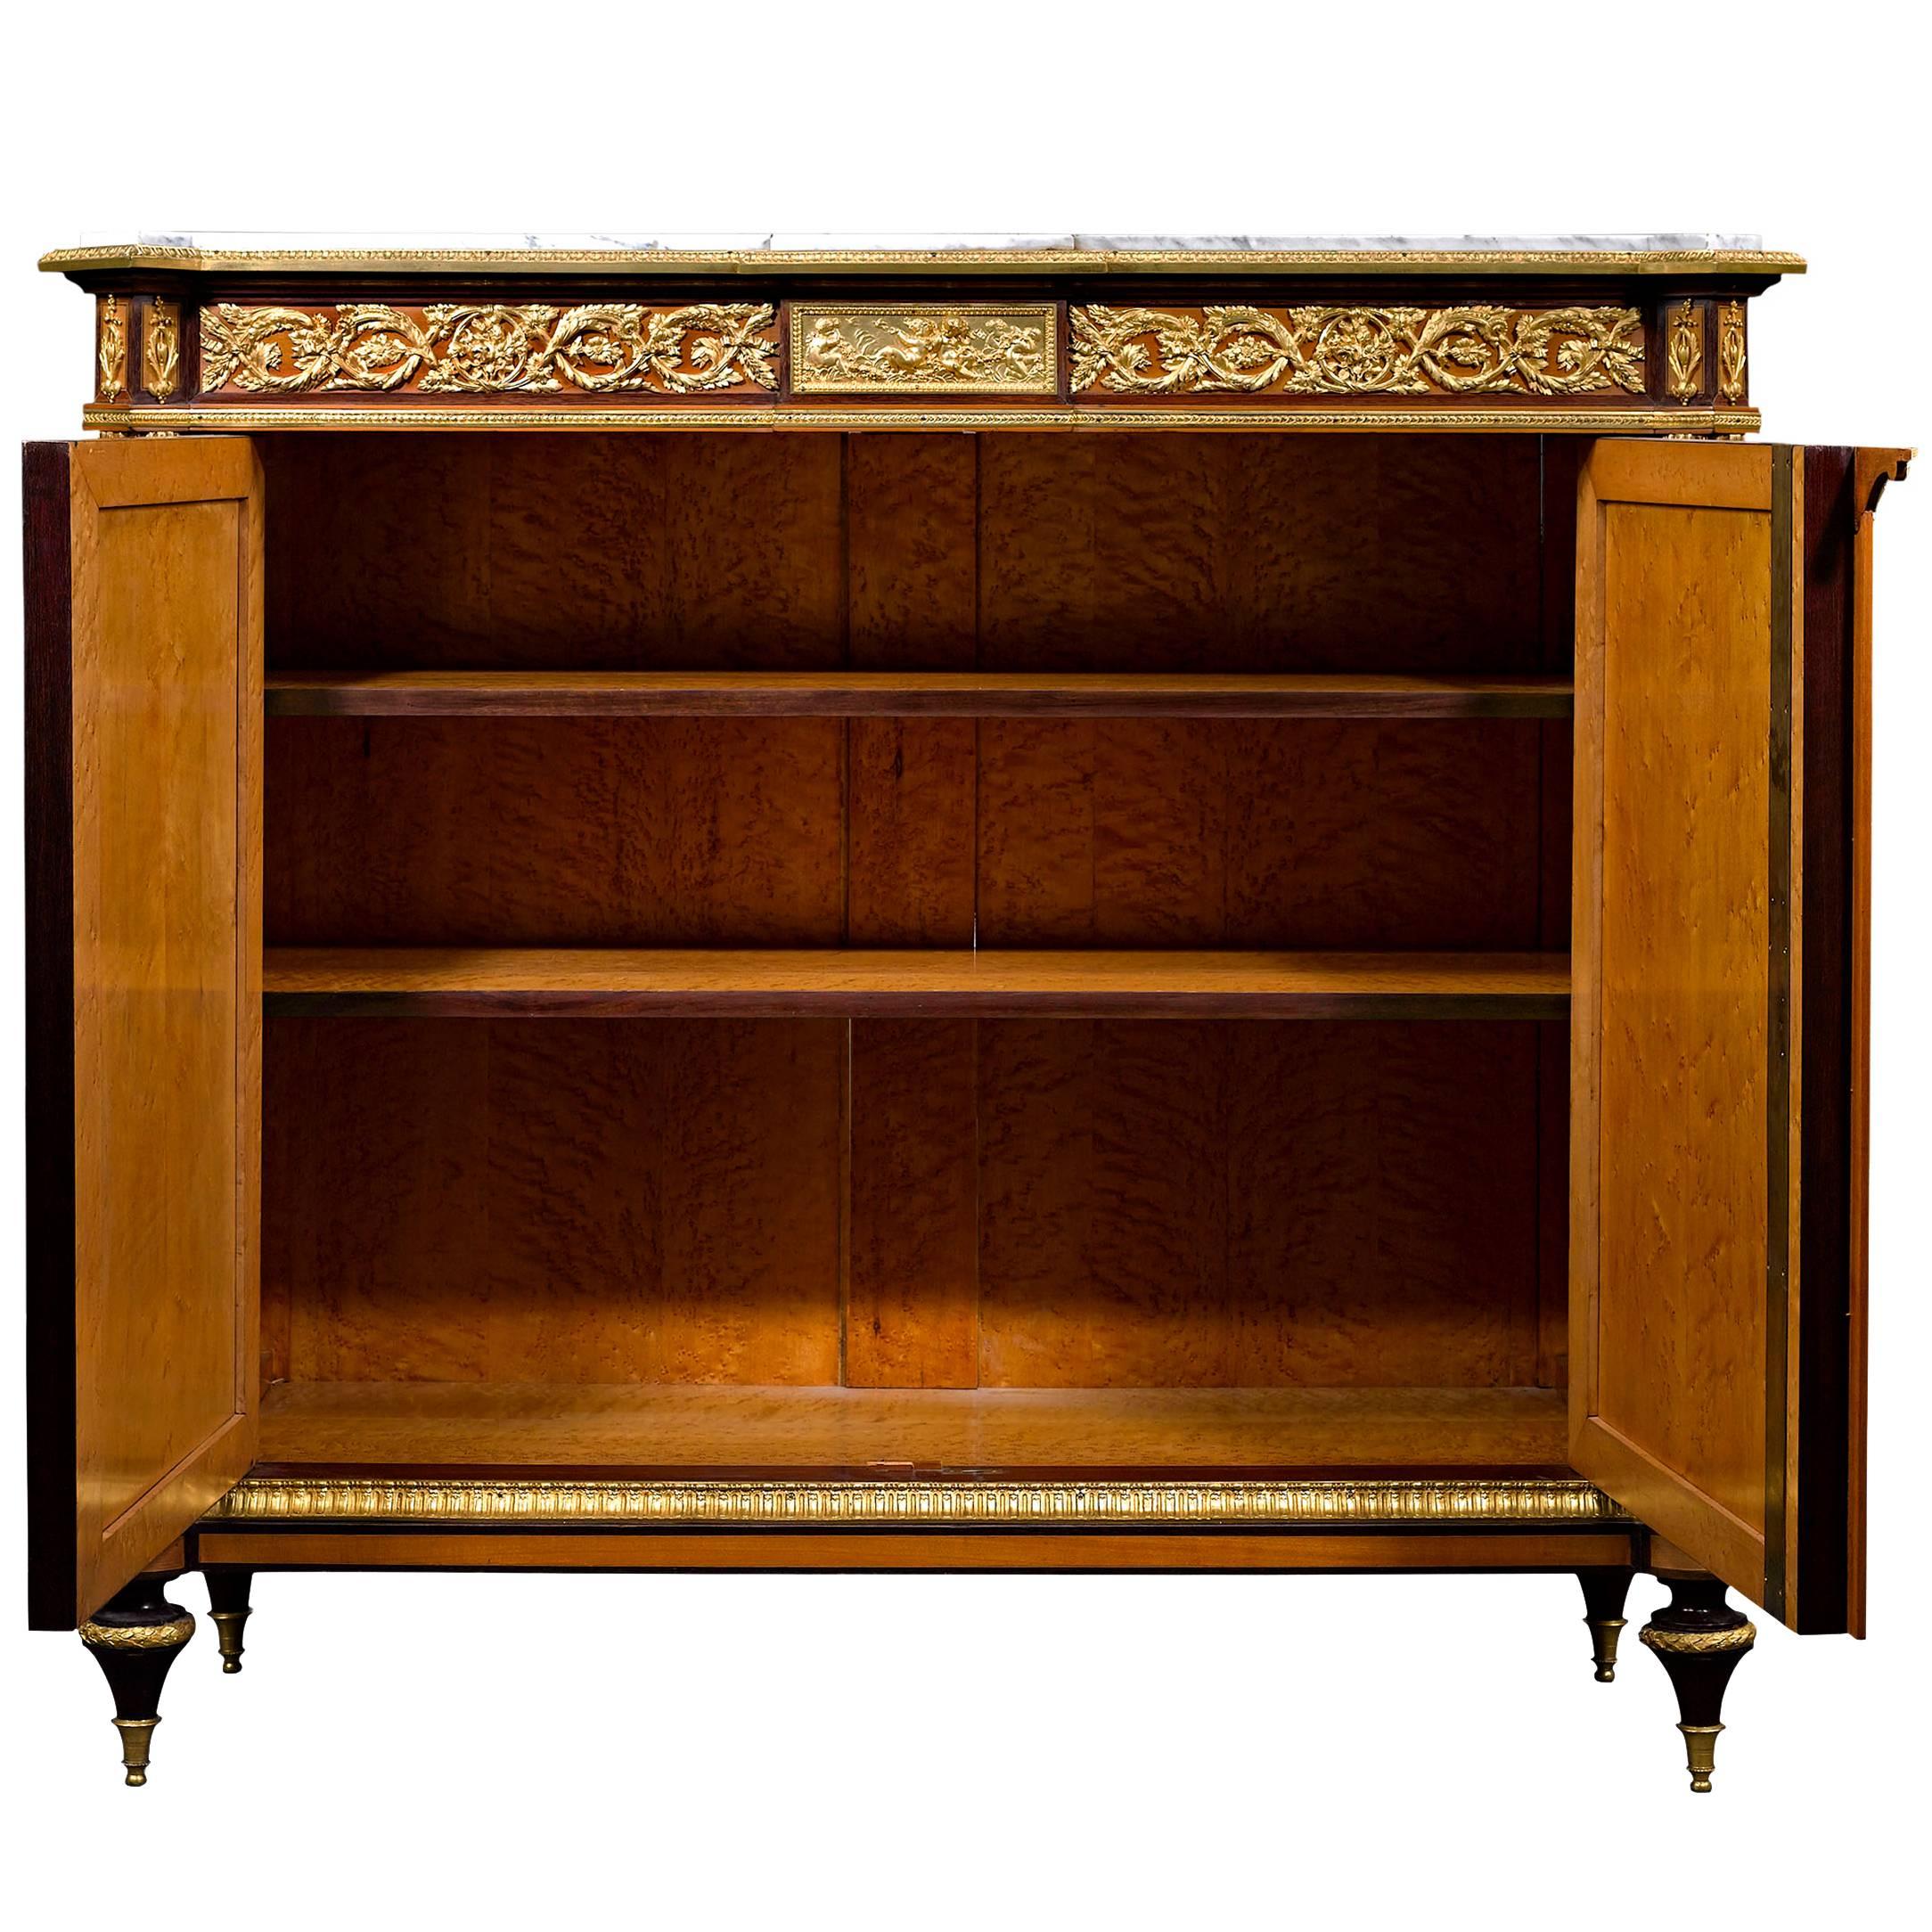 French Exceptional Inlaid Cabinets Attributed to Victor Paillard